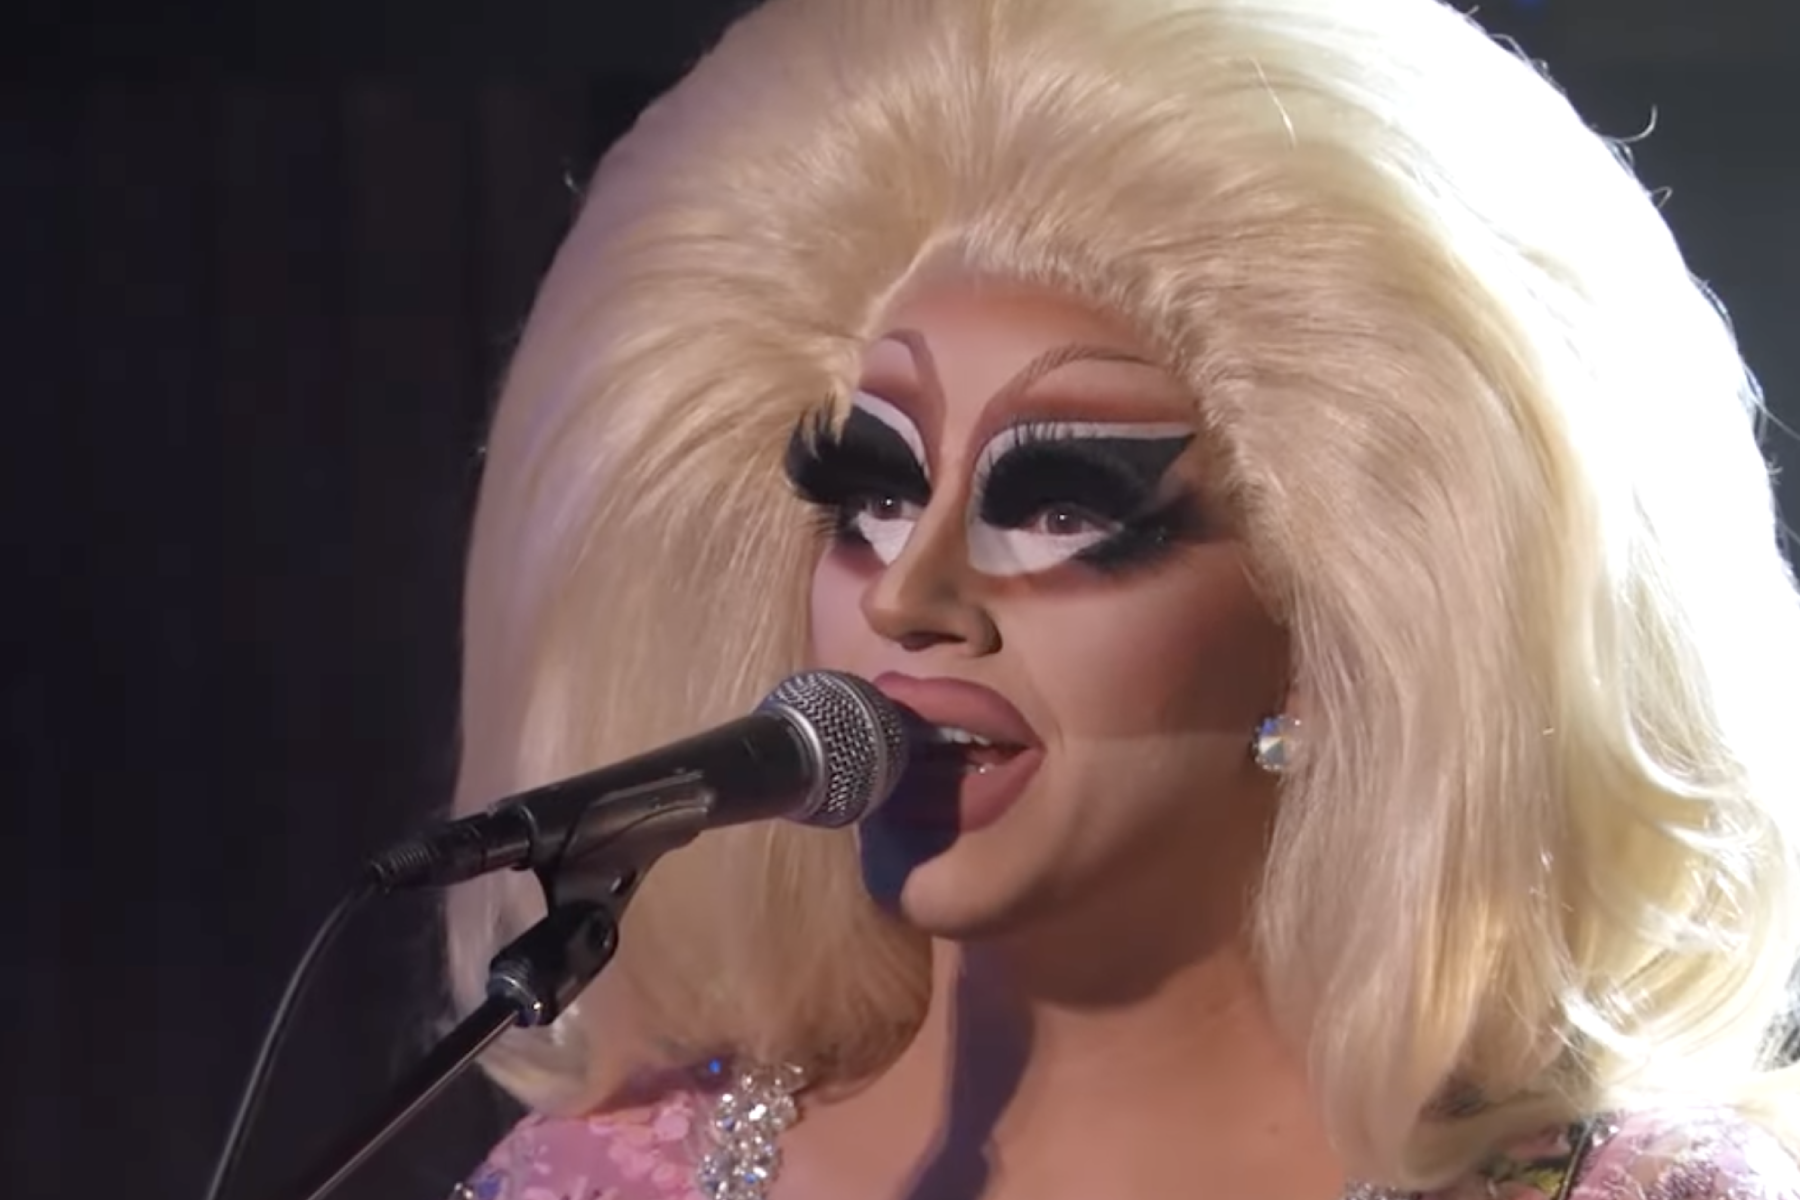 Trixie Mattel Teams With Shakey Graves for ‘This Town’ on ‘Kimmel’